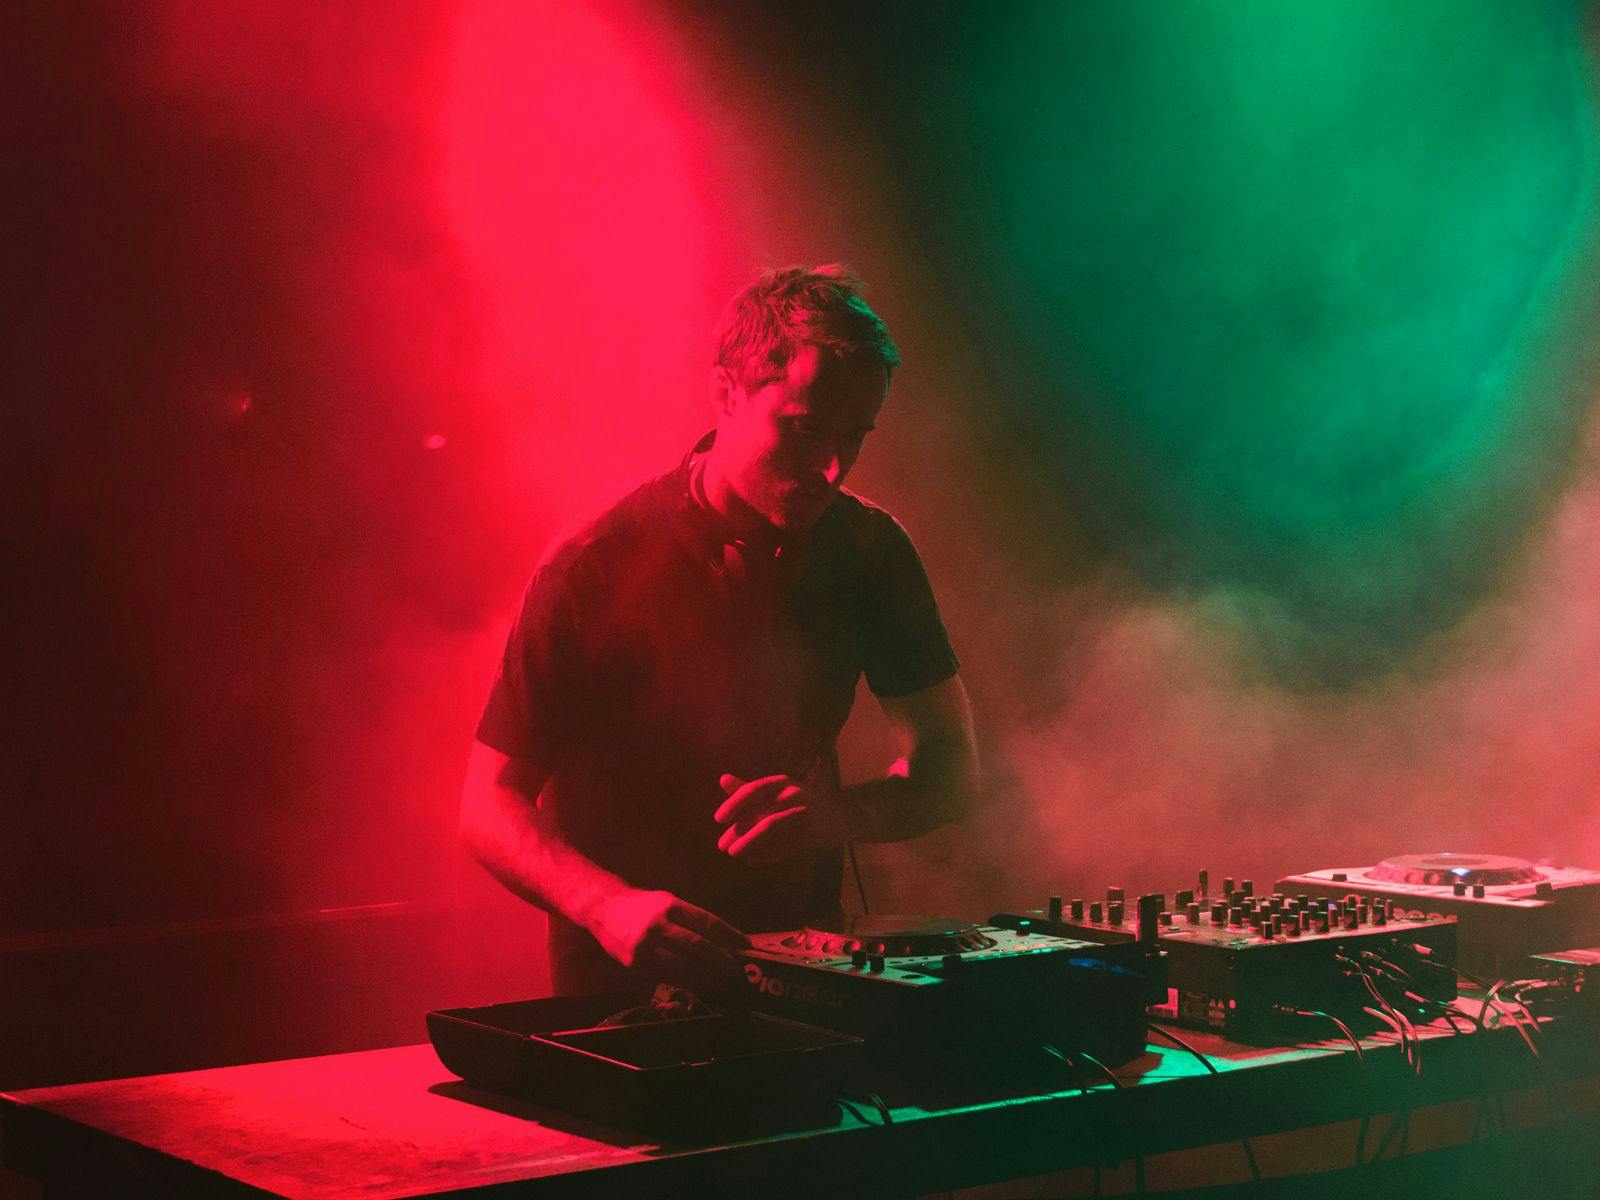 JLaw performing on a set of DJ decks, smoke fills the room with red and green lighting up the scene.